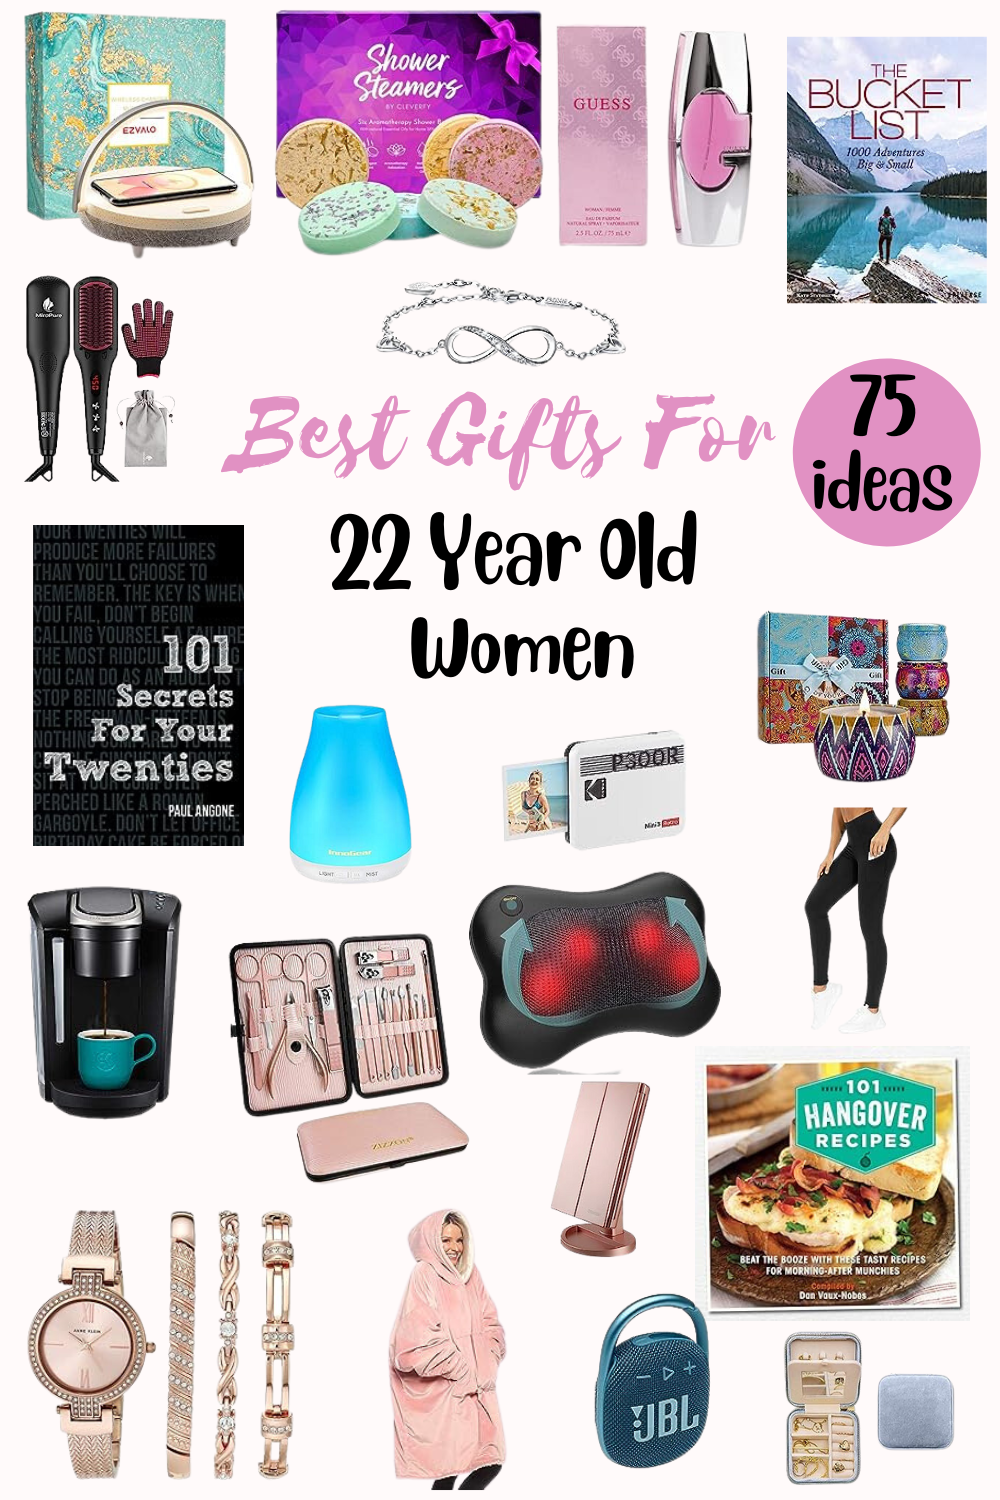 Gifts for 22 Year Old Woman - Best Gifts For Women in Their Twenties